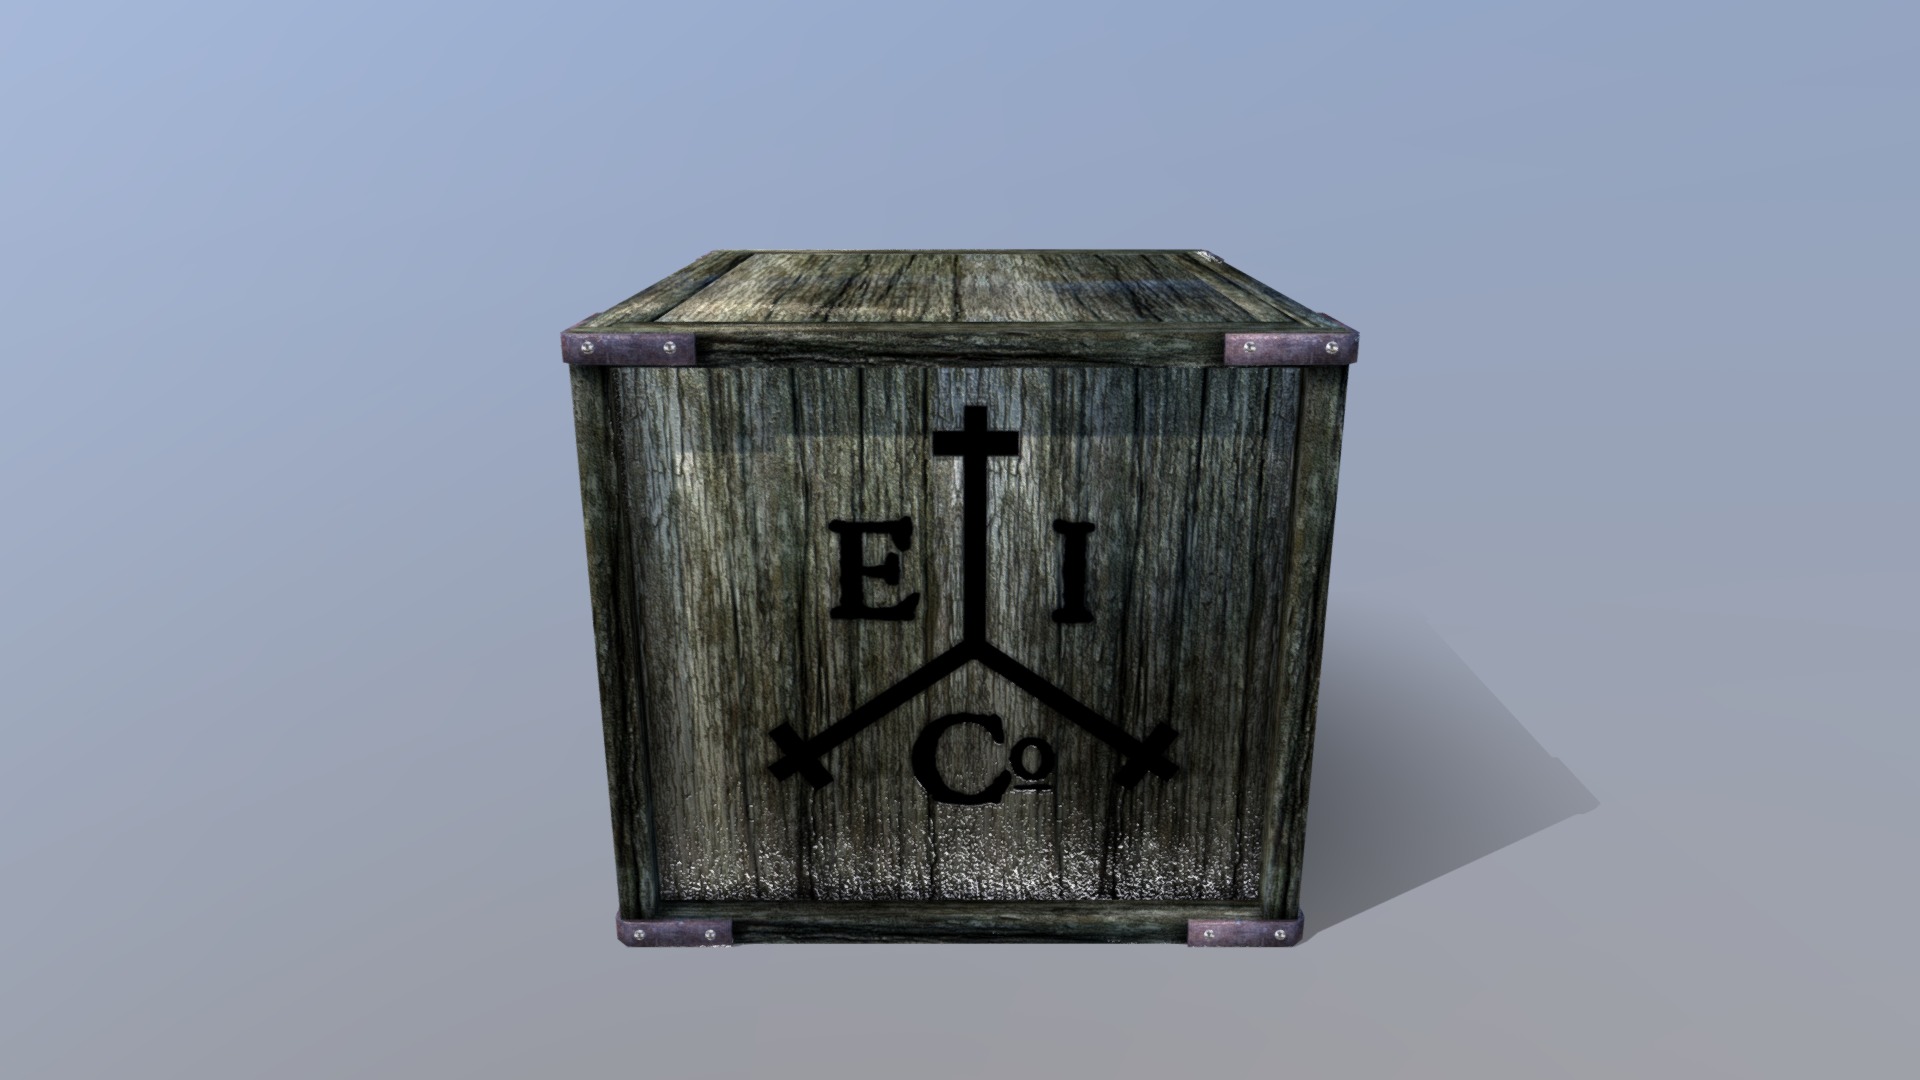 3D model East India Co Crate - This is a 3D model of the East India Co Crate. The 3D model is about a wooden birdhouse with a face.